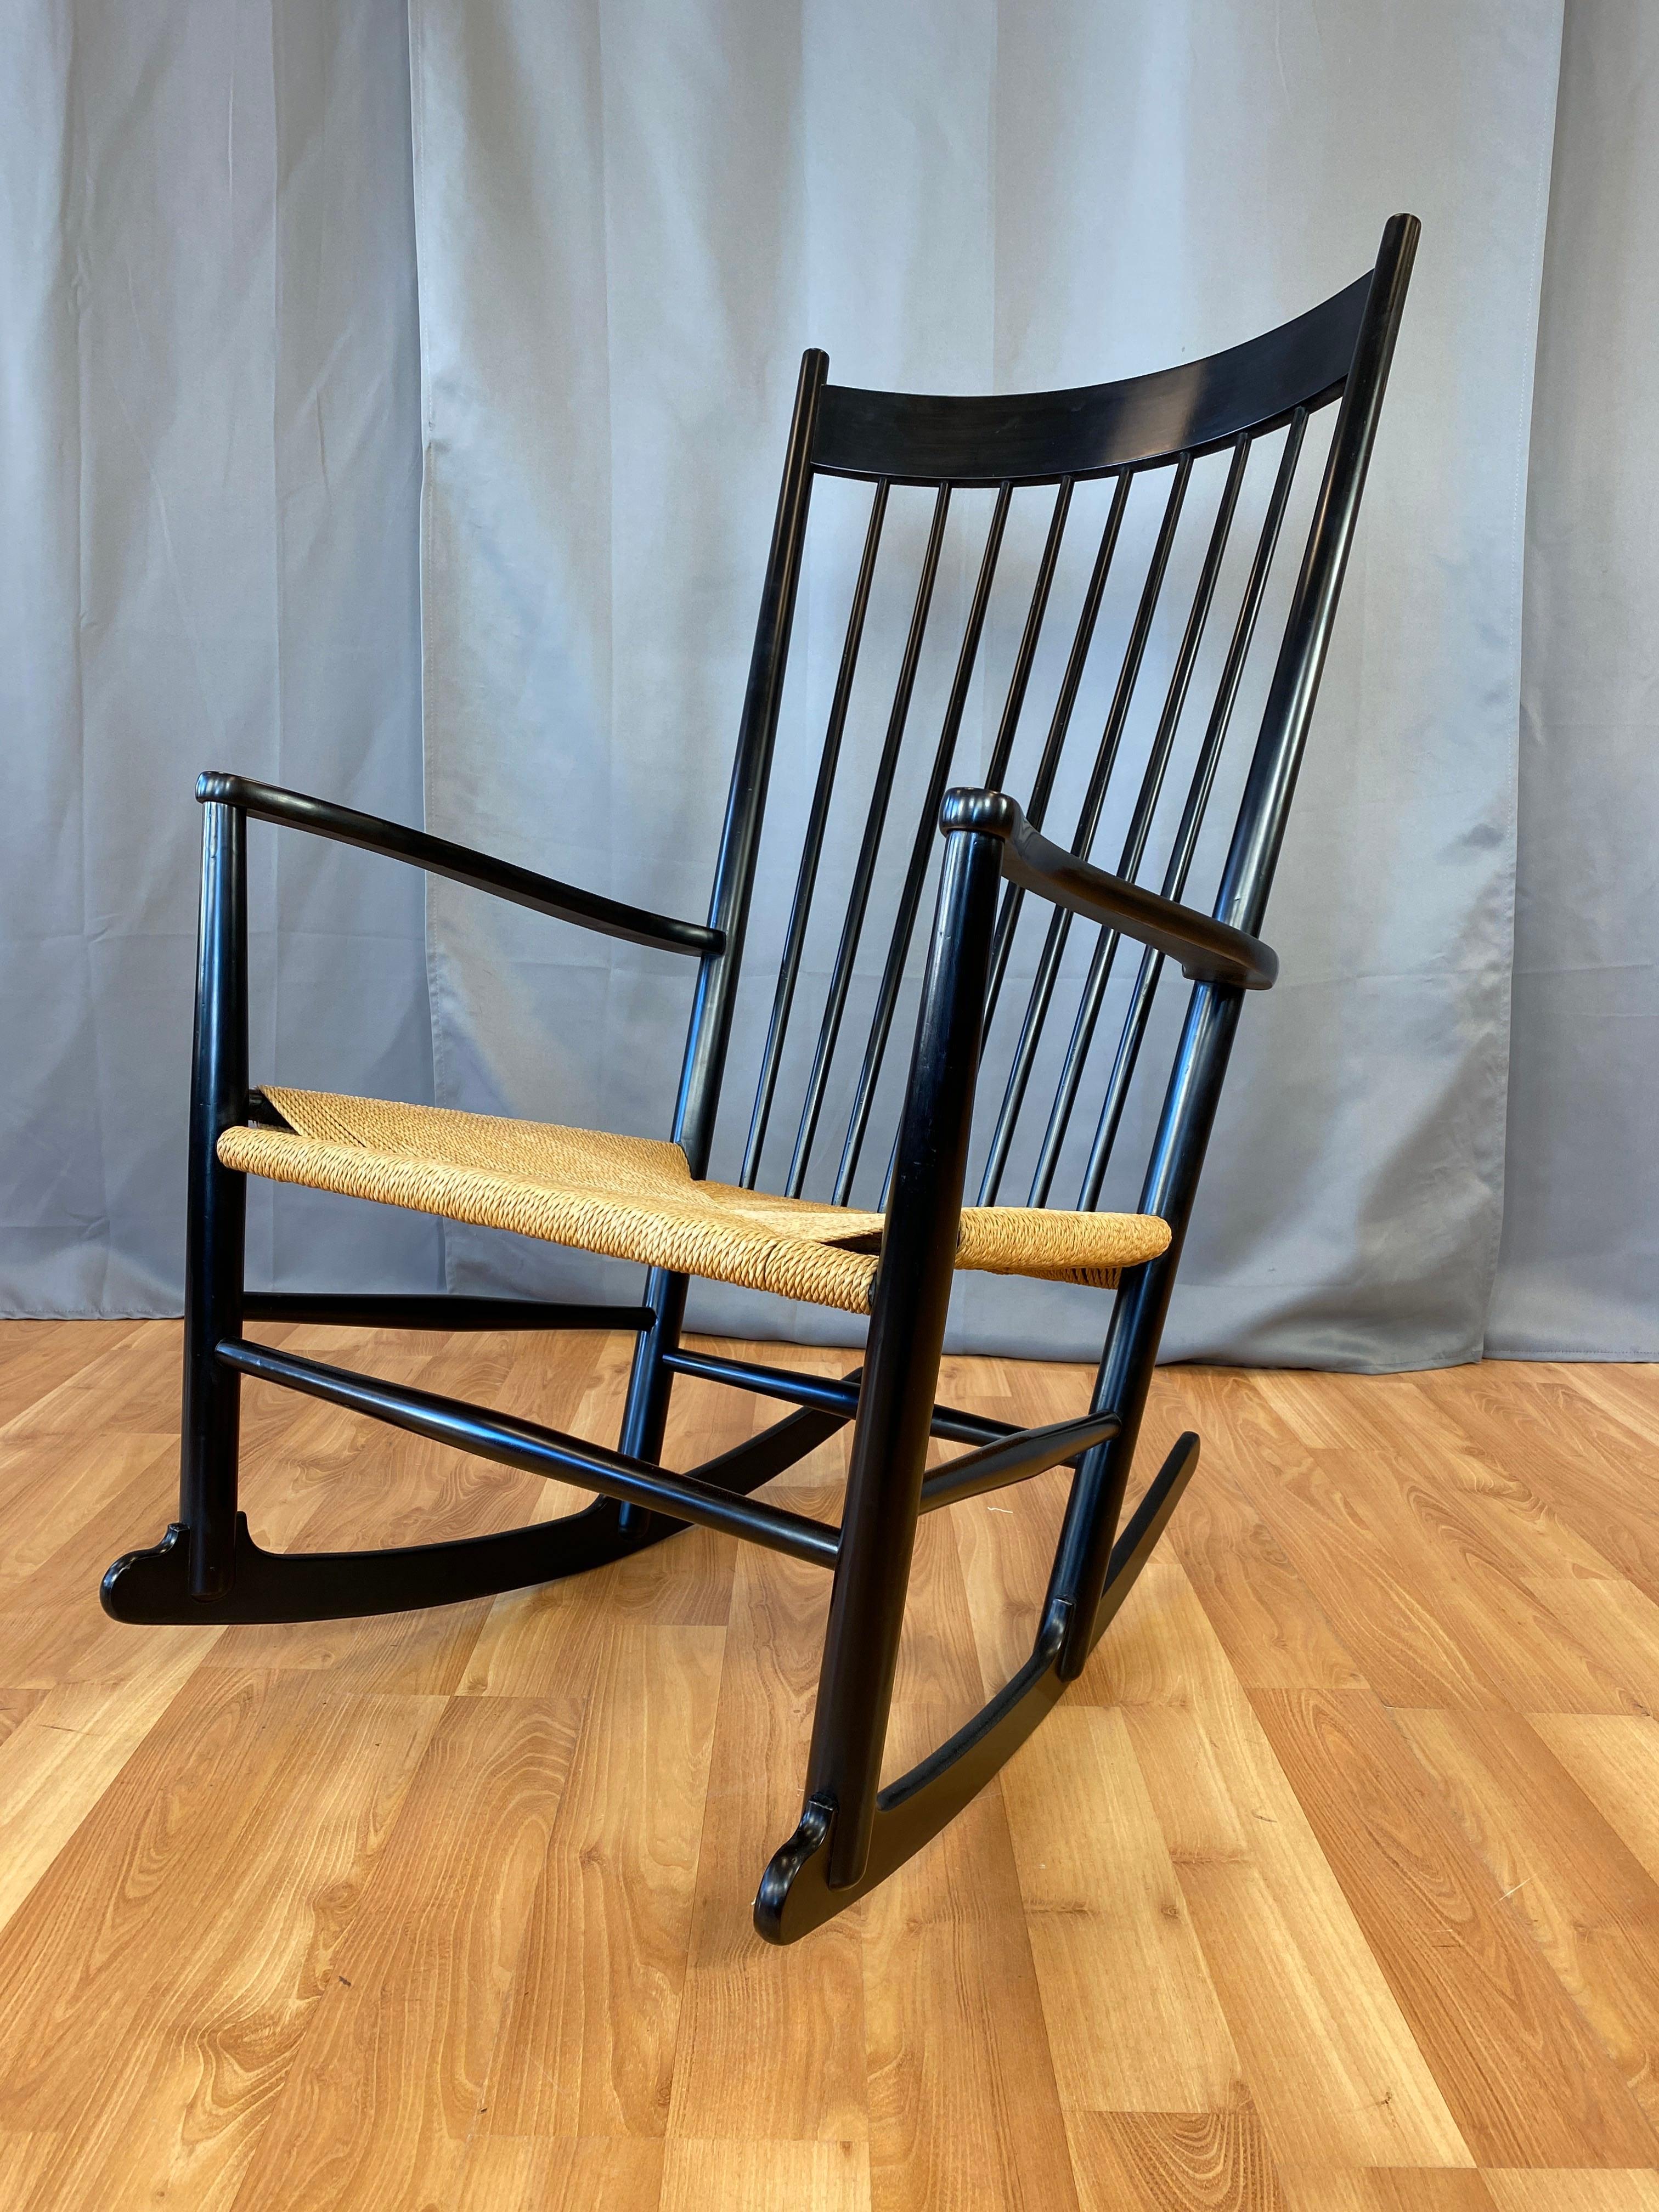 A generously proportioned model J-16 rocking chair, looks to be recently painted black, with woven paper cord seats. 

A Classic and comfortable design first introduced in 1944, these high-backed ergonomic rockers feature tapering spindles,